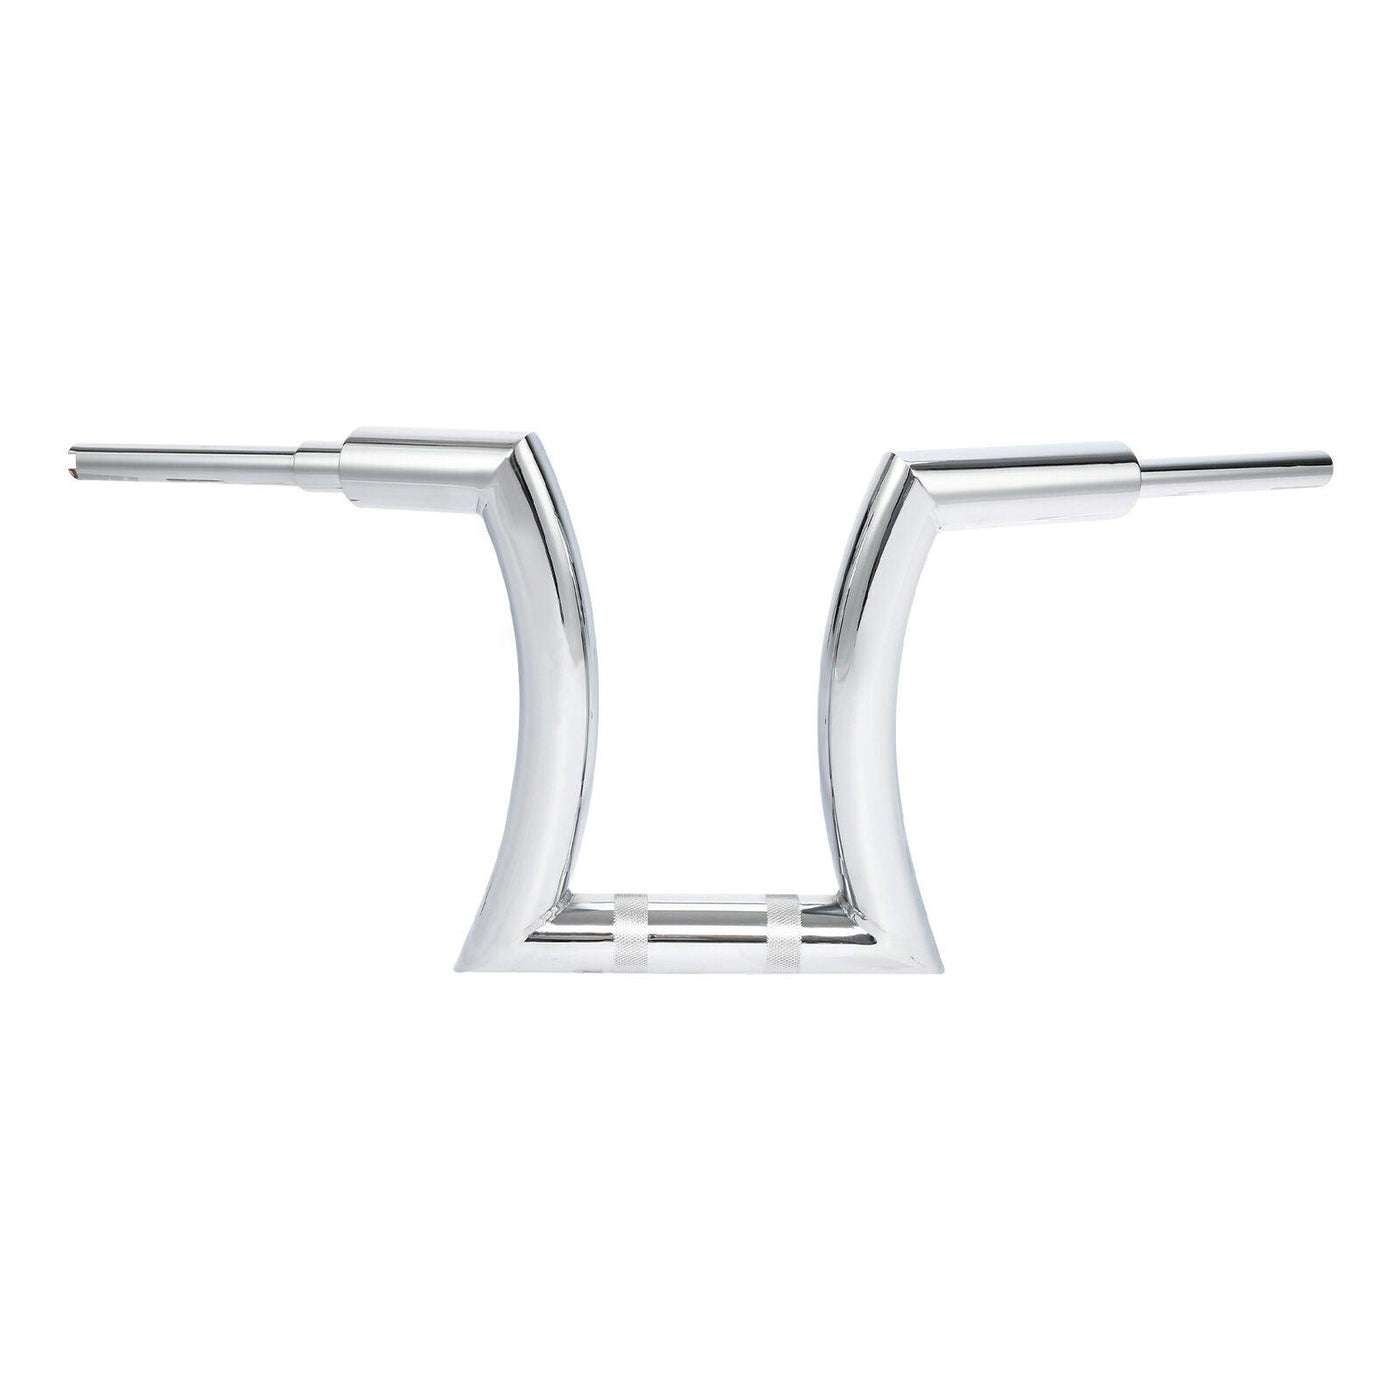 Chrome 14'' Rise 2''Hanger Bar HandleBar Risers Fit For Harley Touring Road King - Moto Life Products